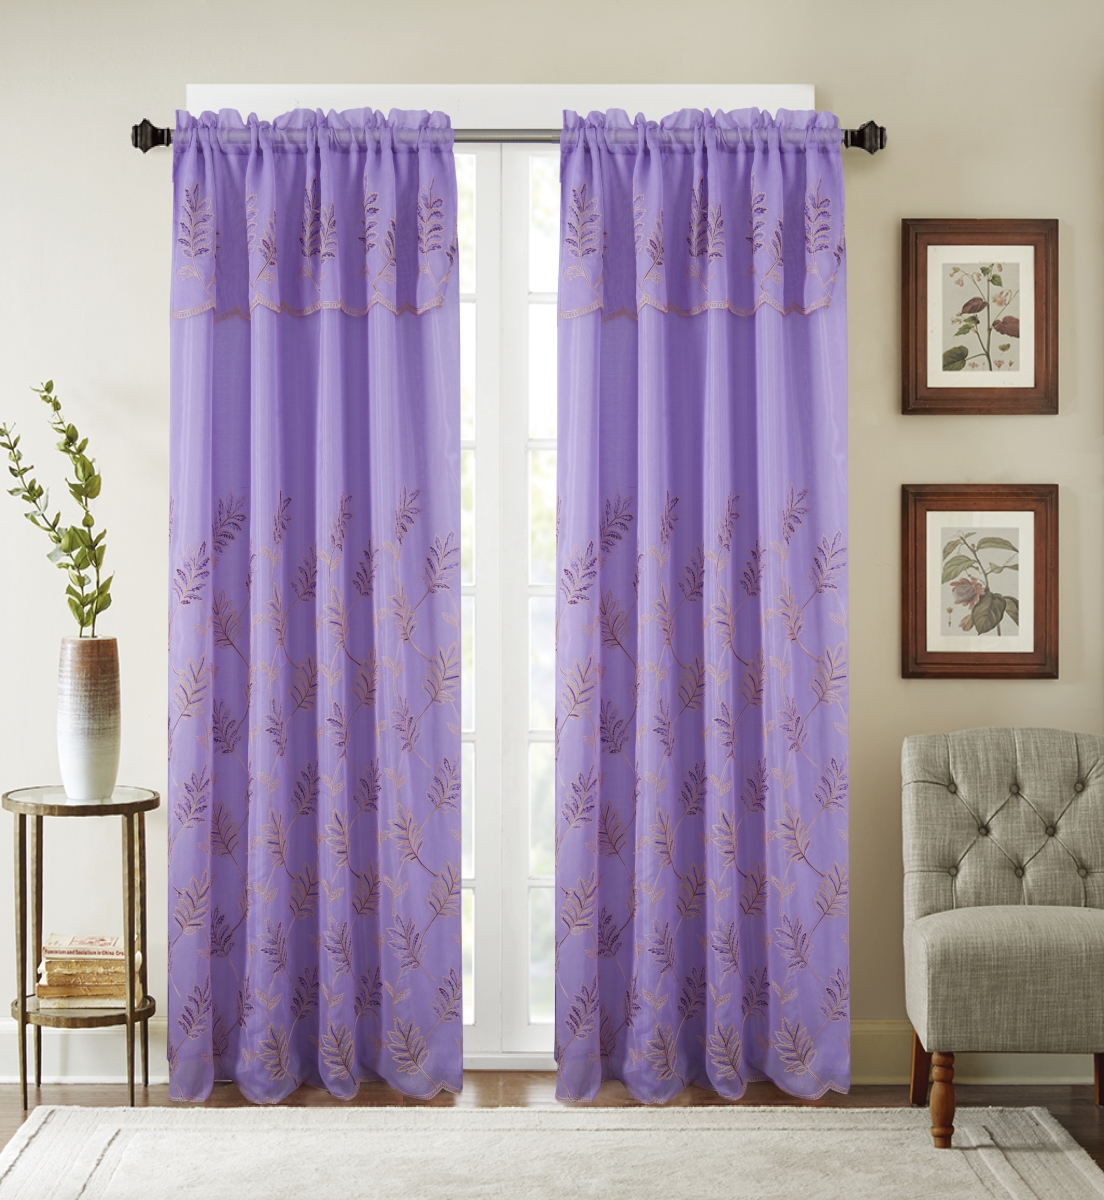 Pnb23746 54 X 90 In. Burton Floral Embroidered Single Rod Pocket Curtain Panel With Attached Valance, Lilac